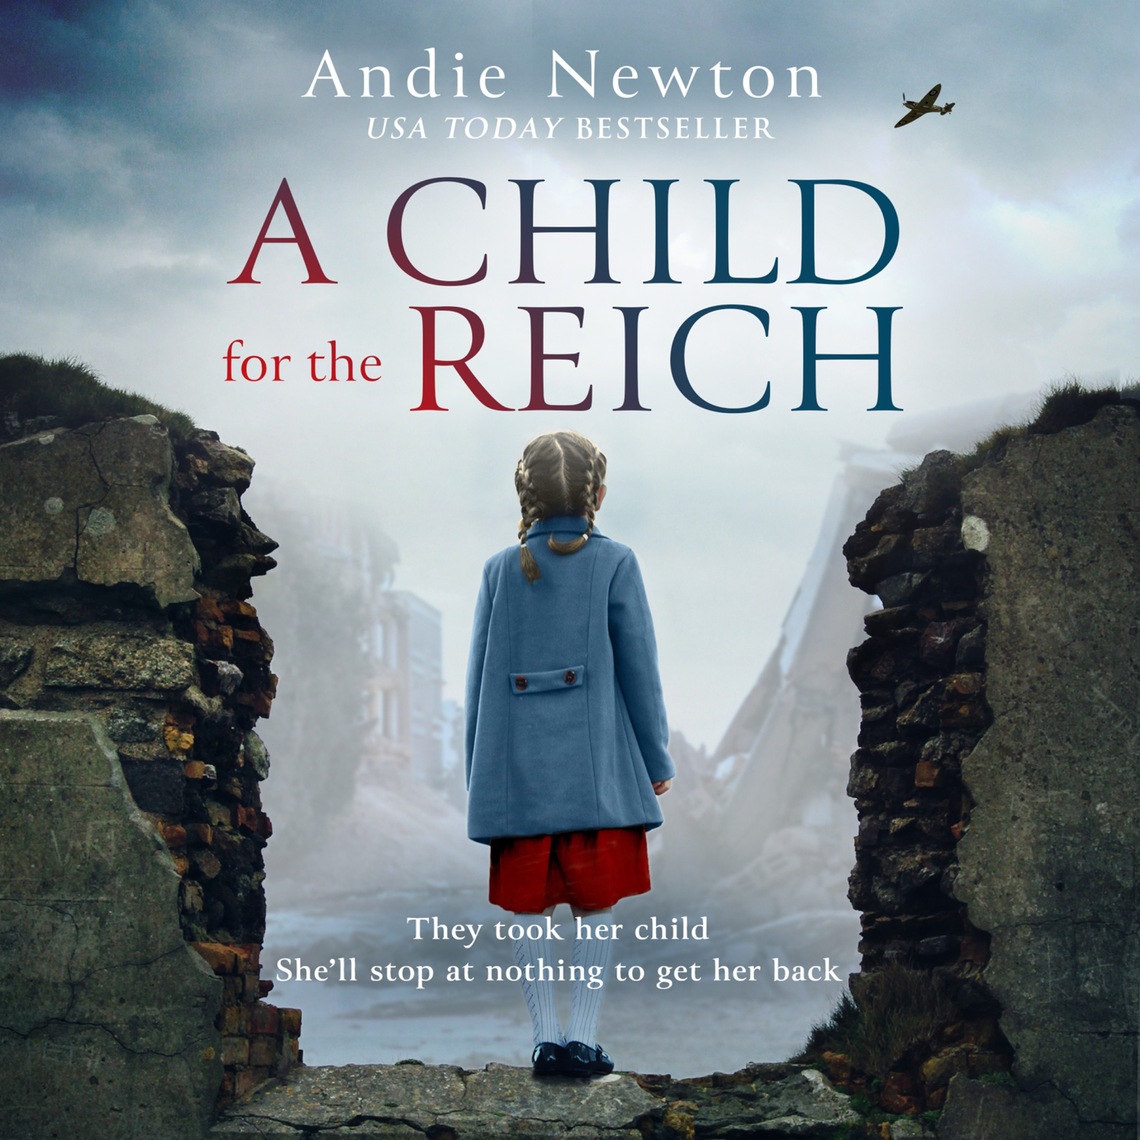 Q&A with Louise Fein, Author of The Hidden Child - Book Club Chat